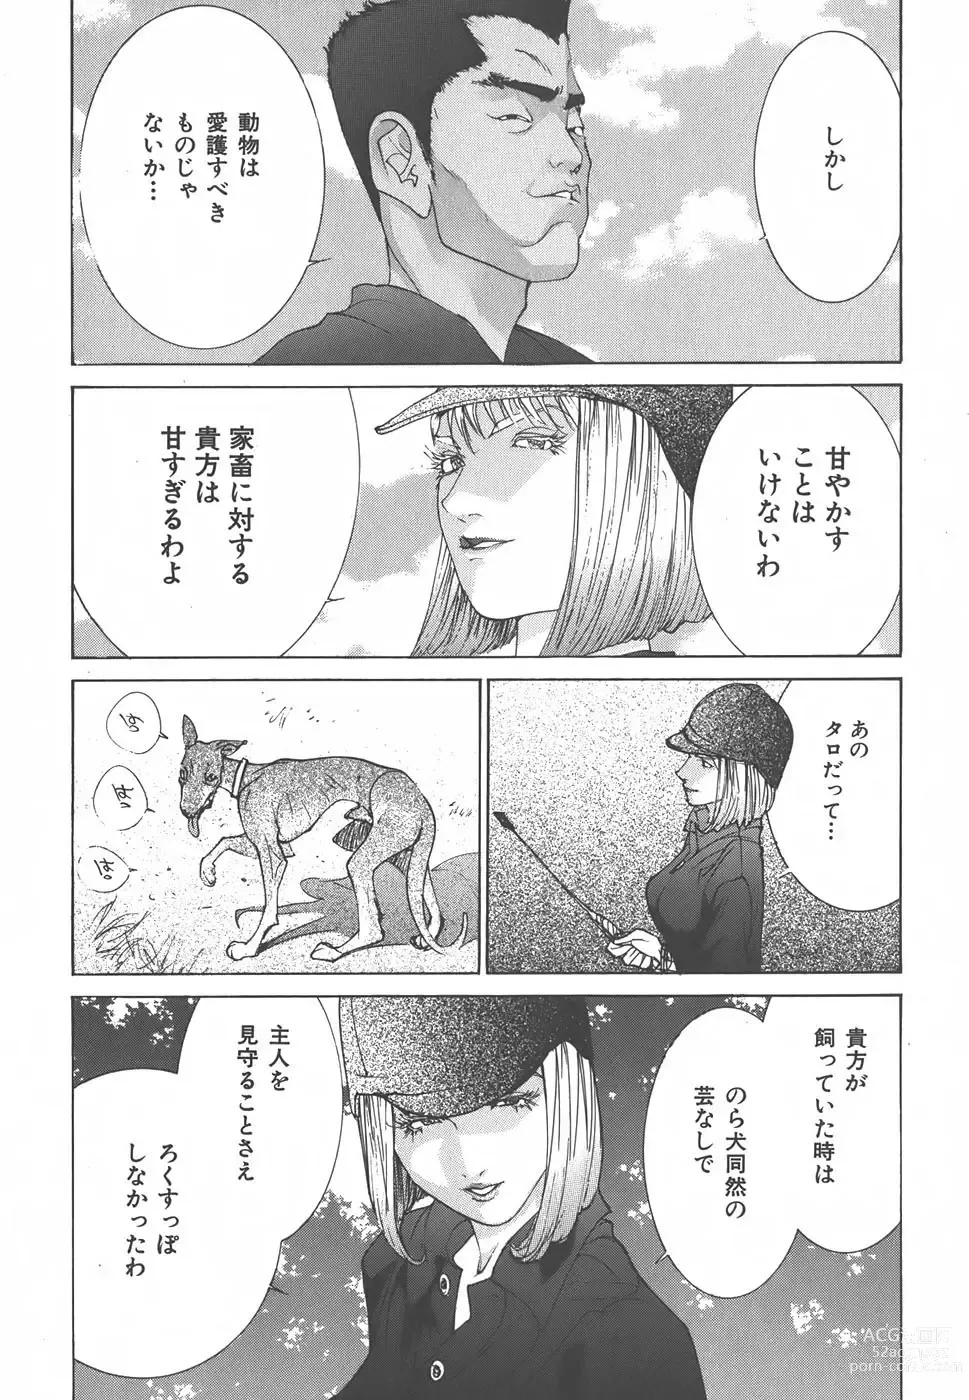 Page 15 of doujinshi Yapoo the human cattle vol.01